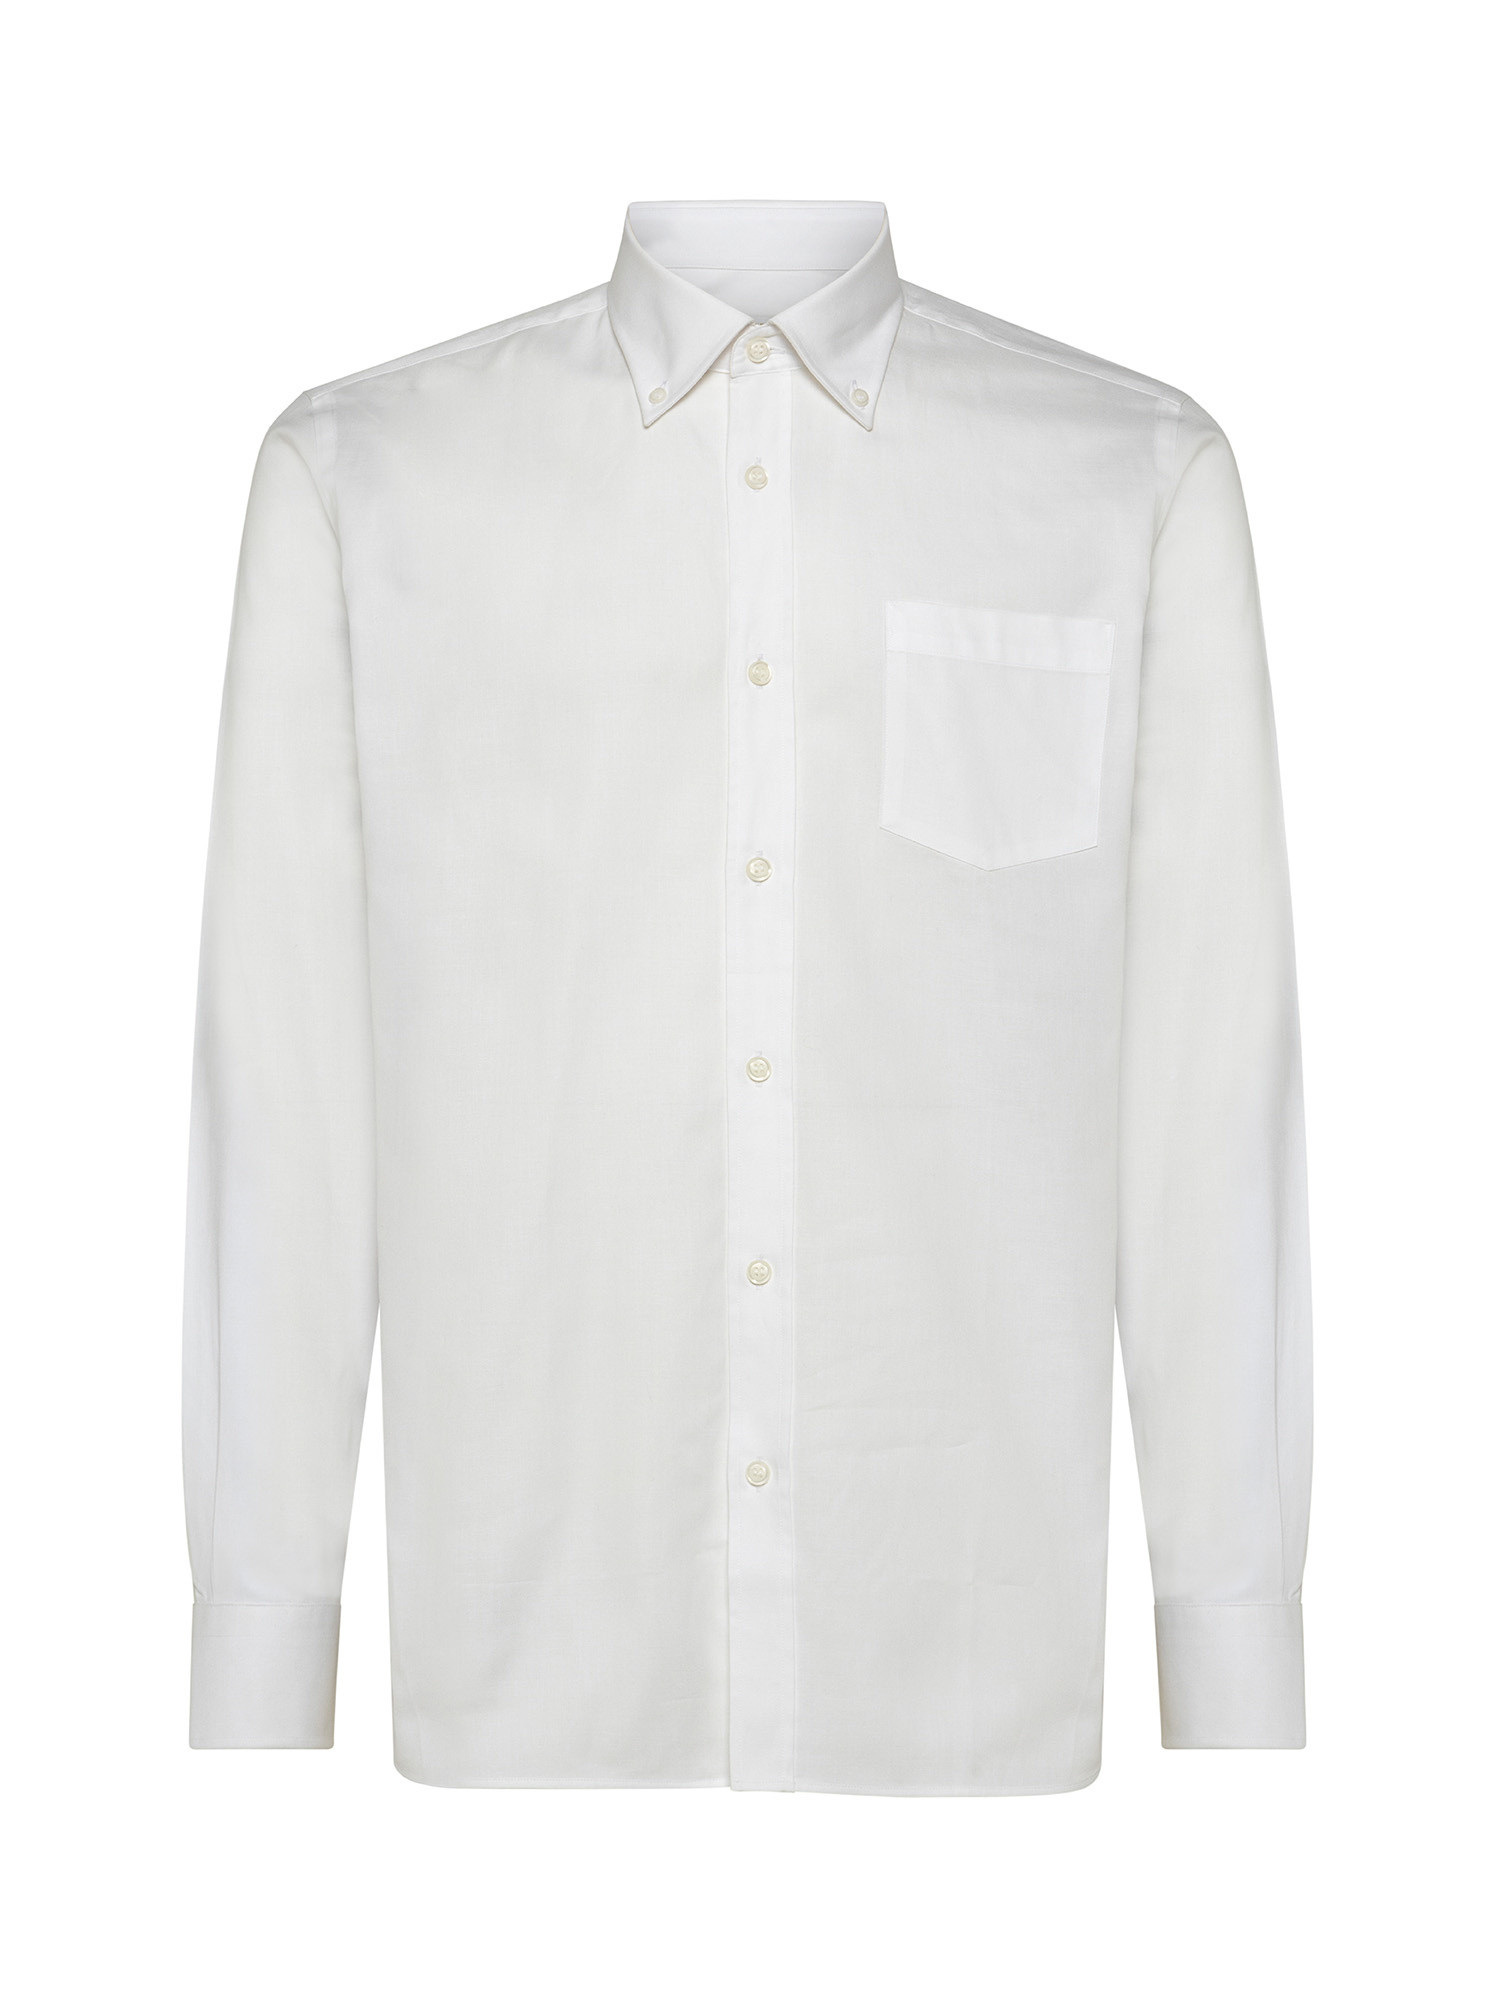 Basic tailor fit shirt in pure cotton, White, large image number 1